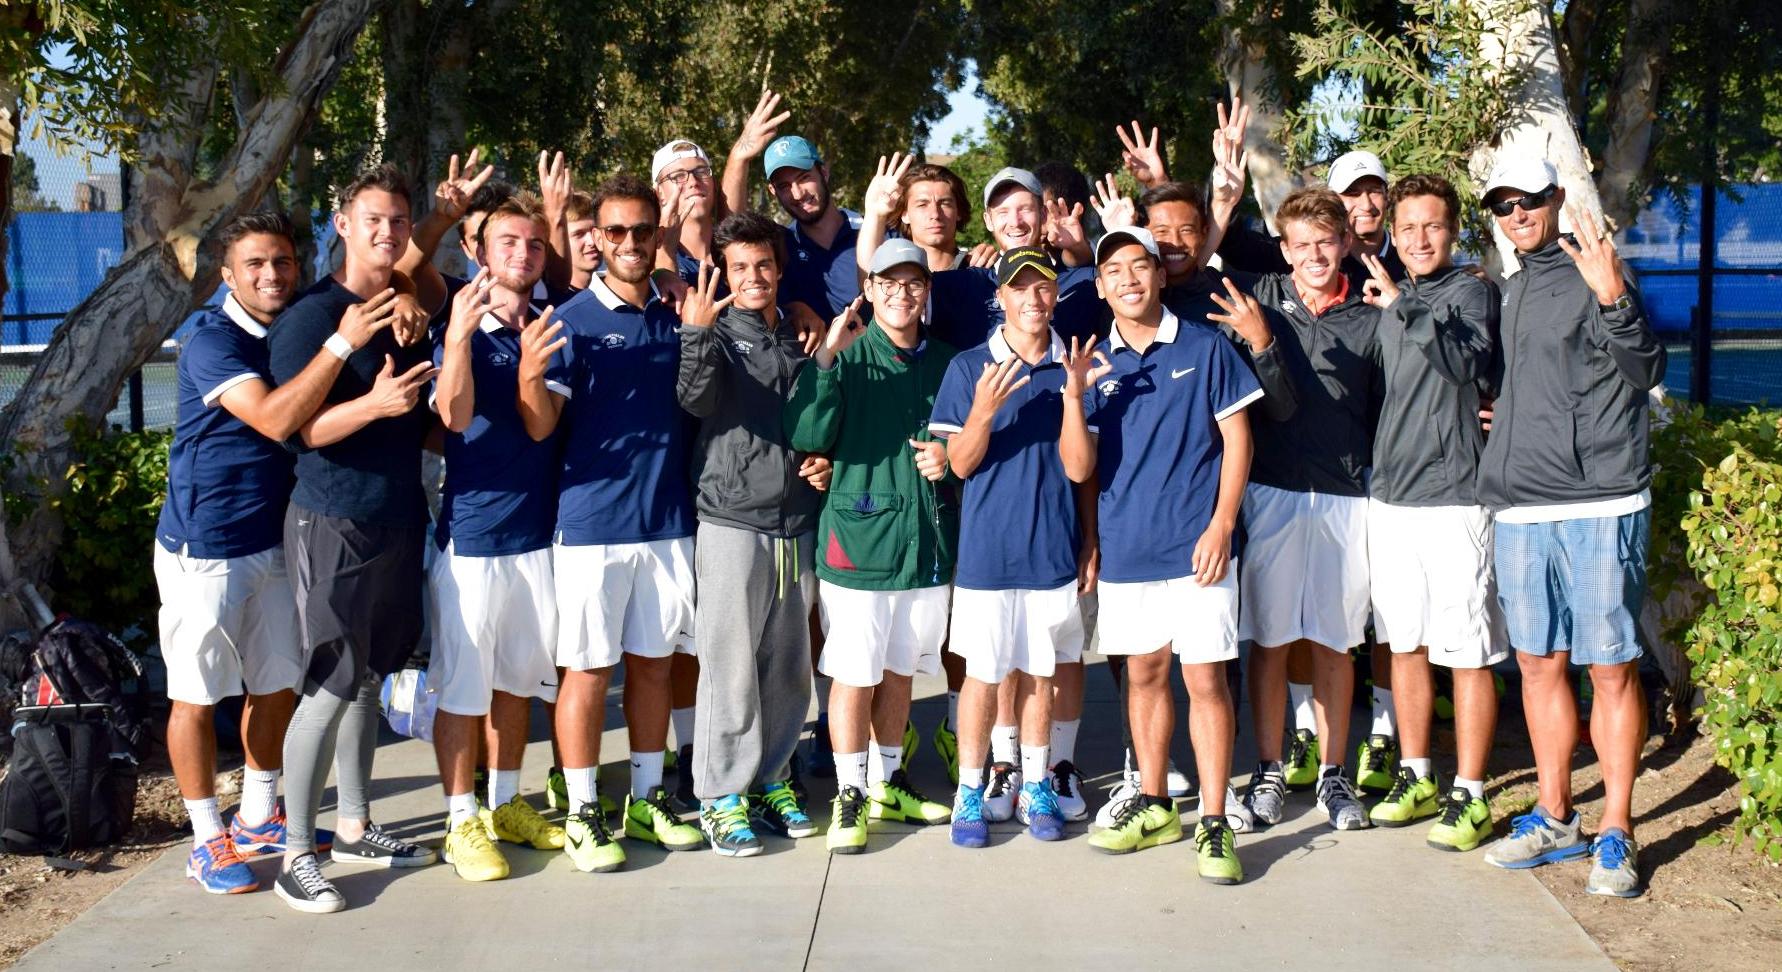 Men's tennis team finishes unbeaten in conference once again